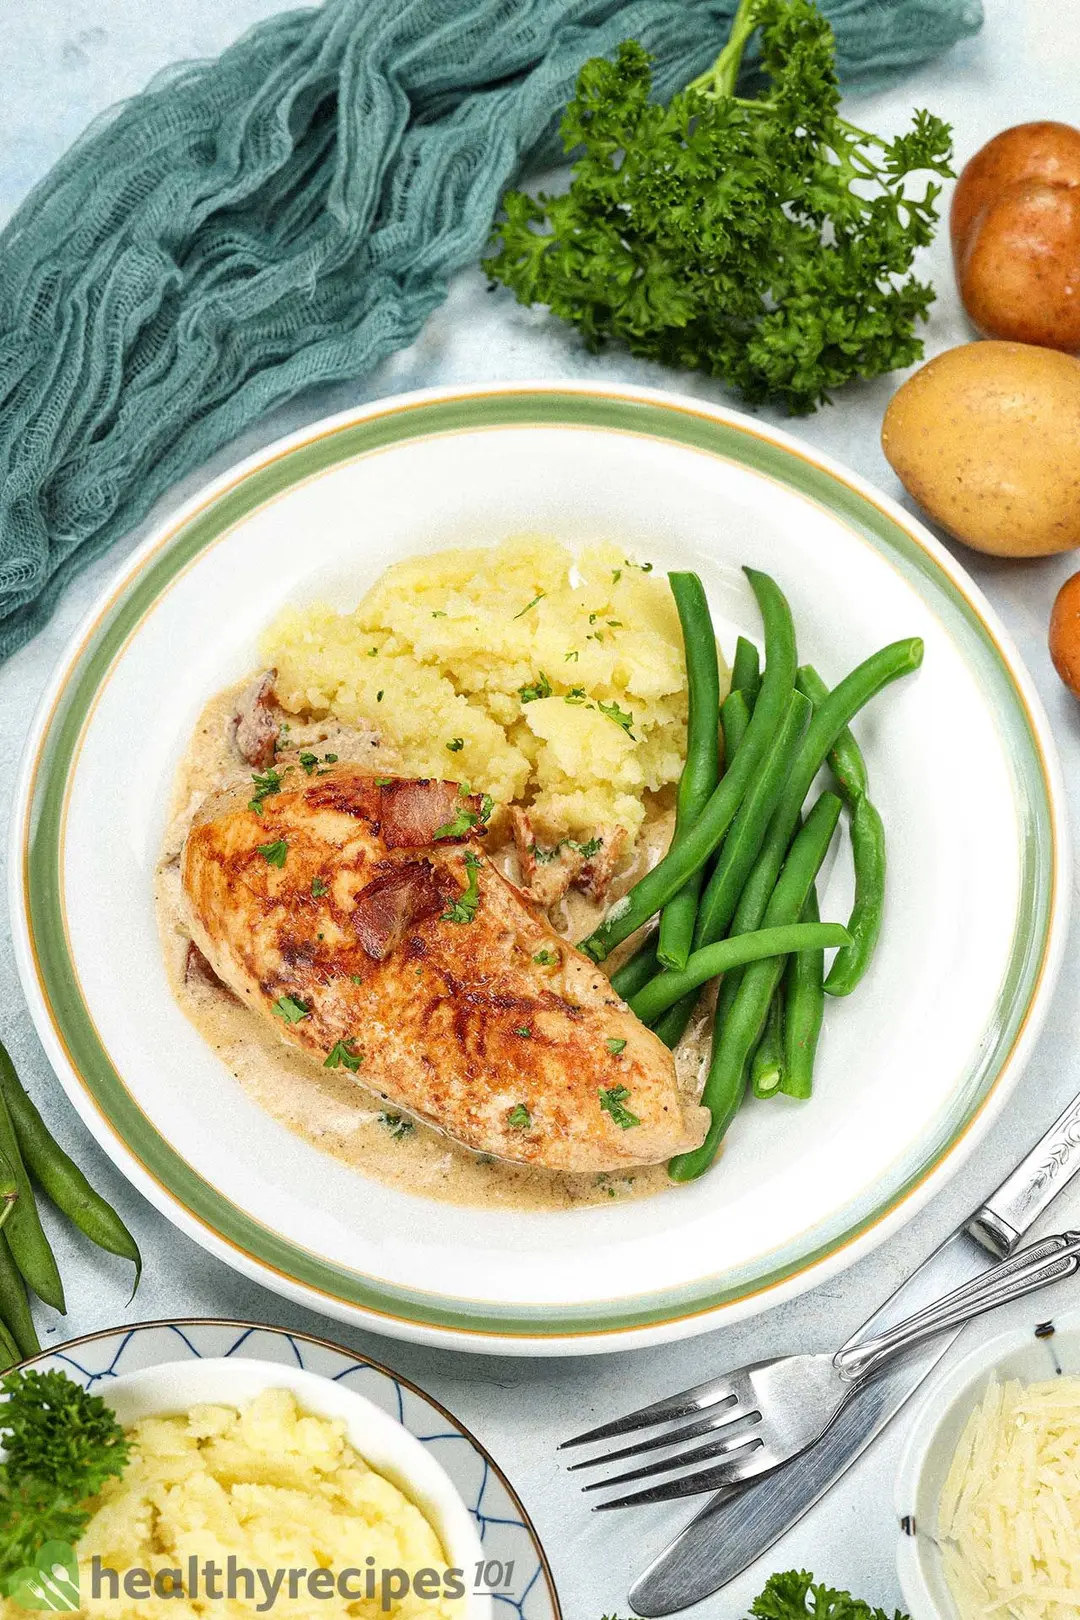 A plate containing a piece of cooked chicken breast, mashed potatoes, and green beans placed next to a fork and a dinner knife